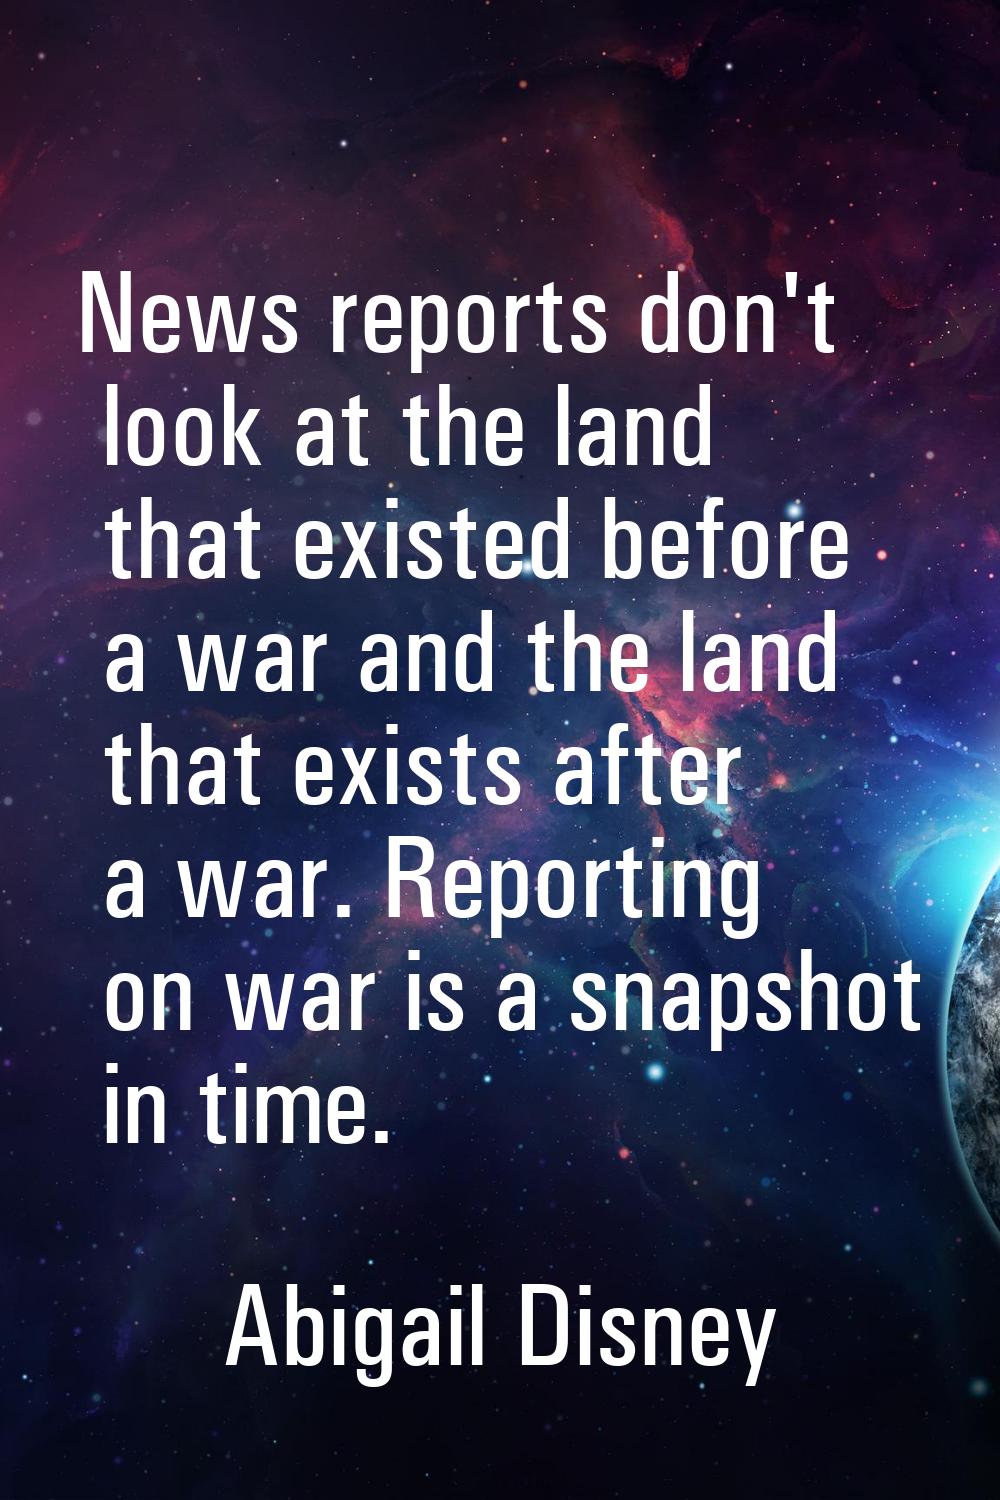 News reports don't look at the land that existed before a war and the land that exists after a war.